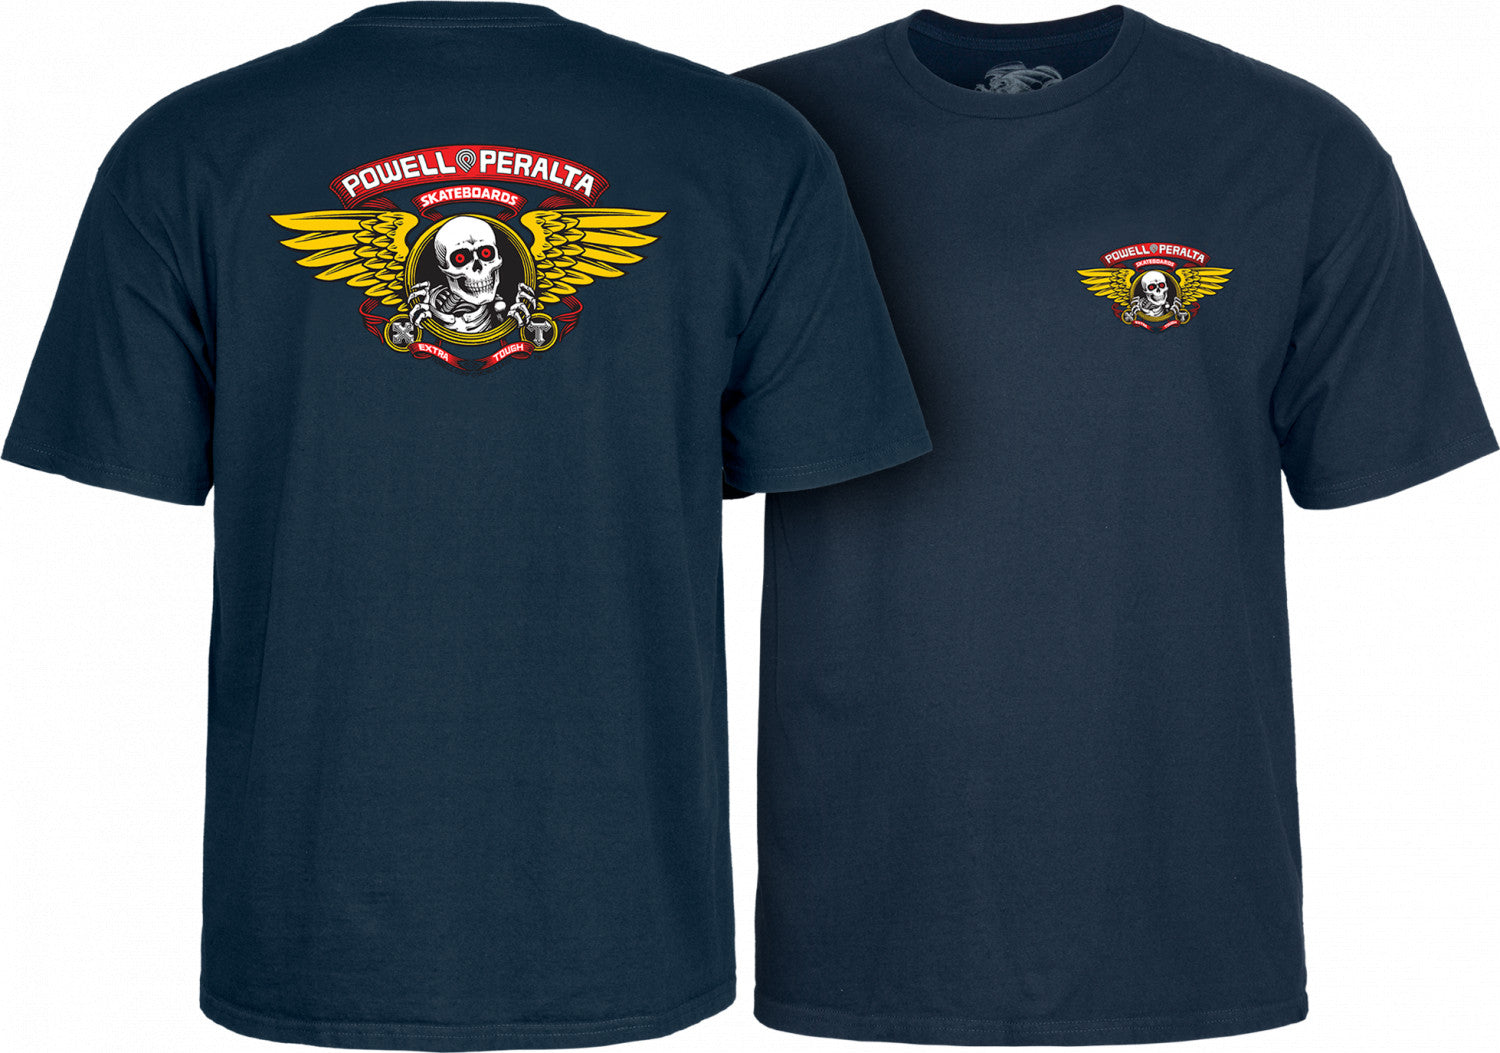 Powell Peralta Winged Ripper S/S Tee Navy S